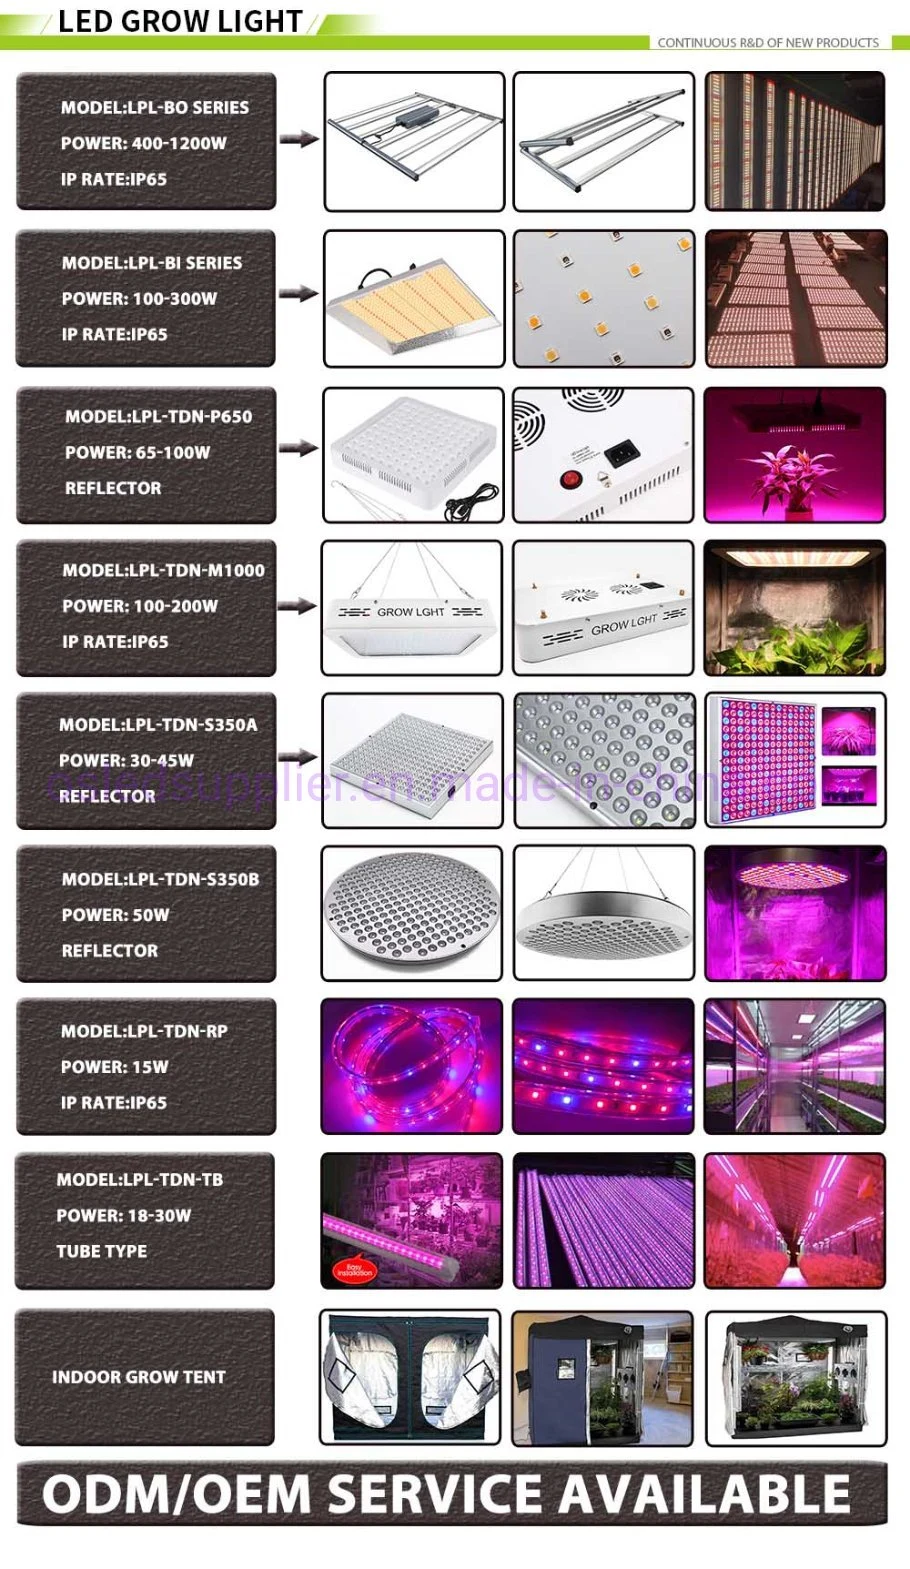 P600 Series Foldable & Dimmable 600W Grow Light Lm301b White Red Full Spectrum LED Grow Light